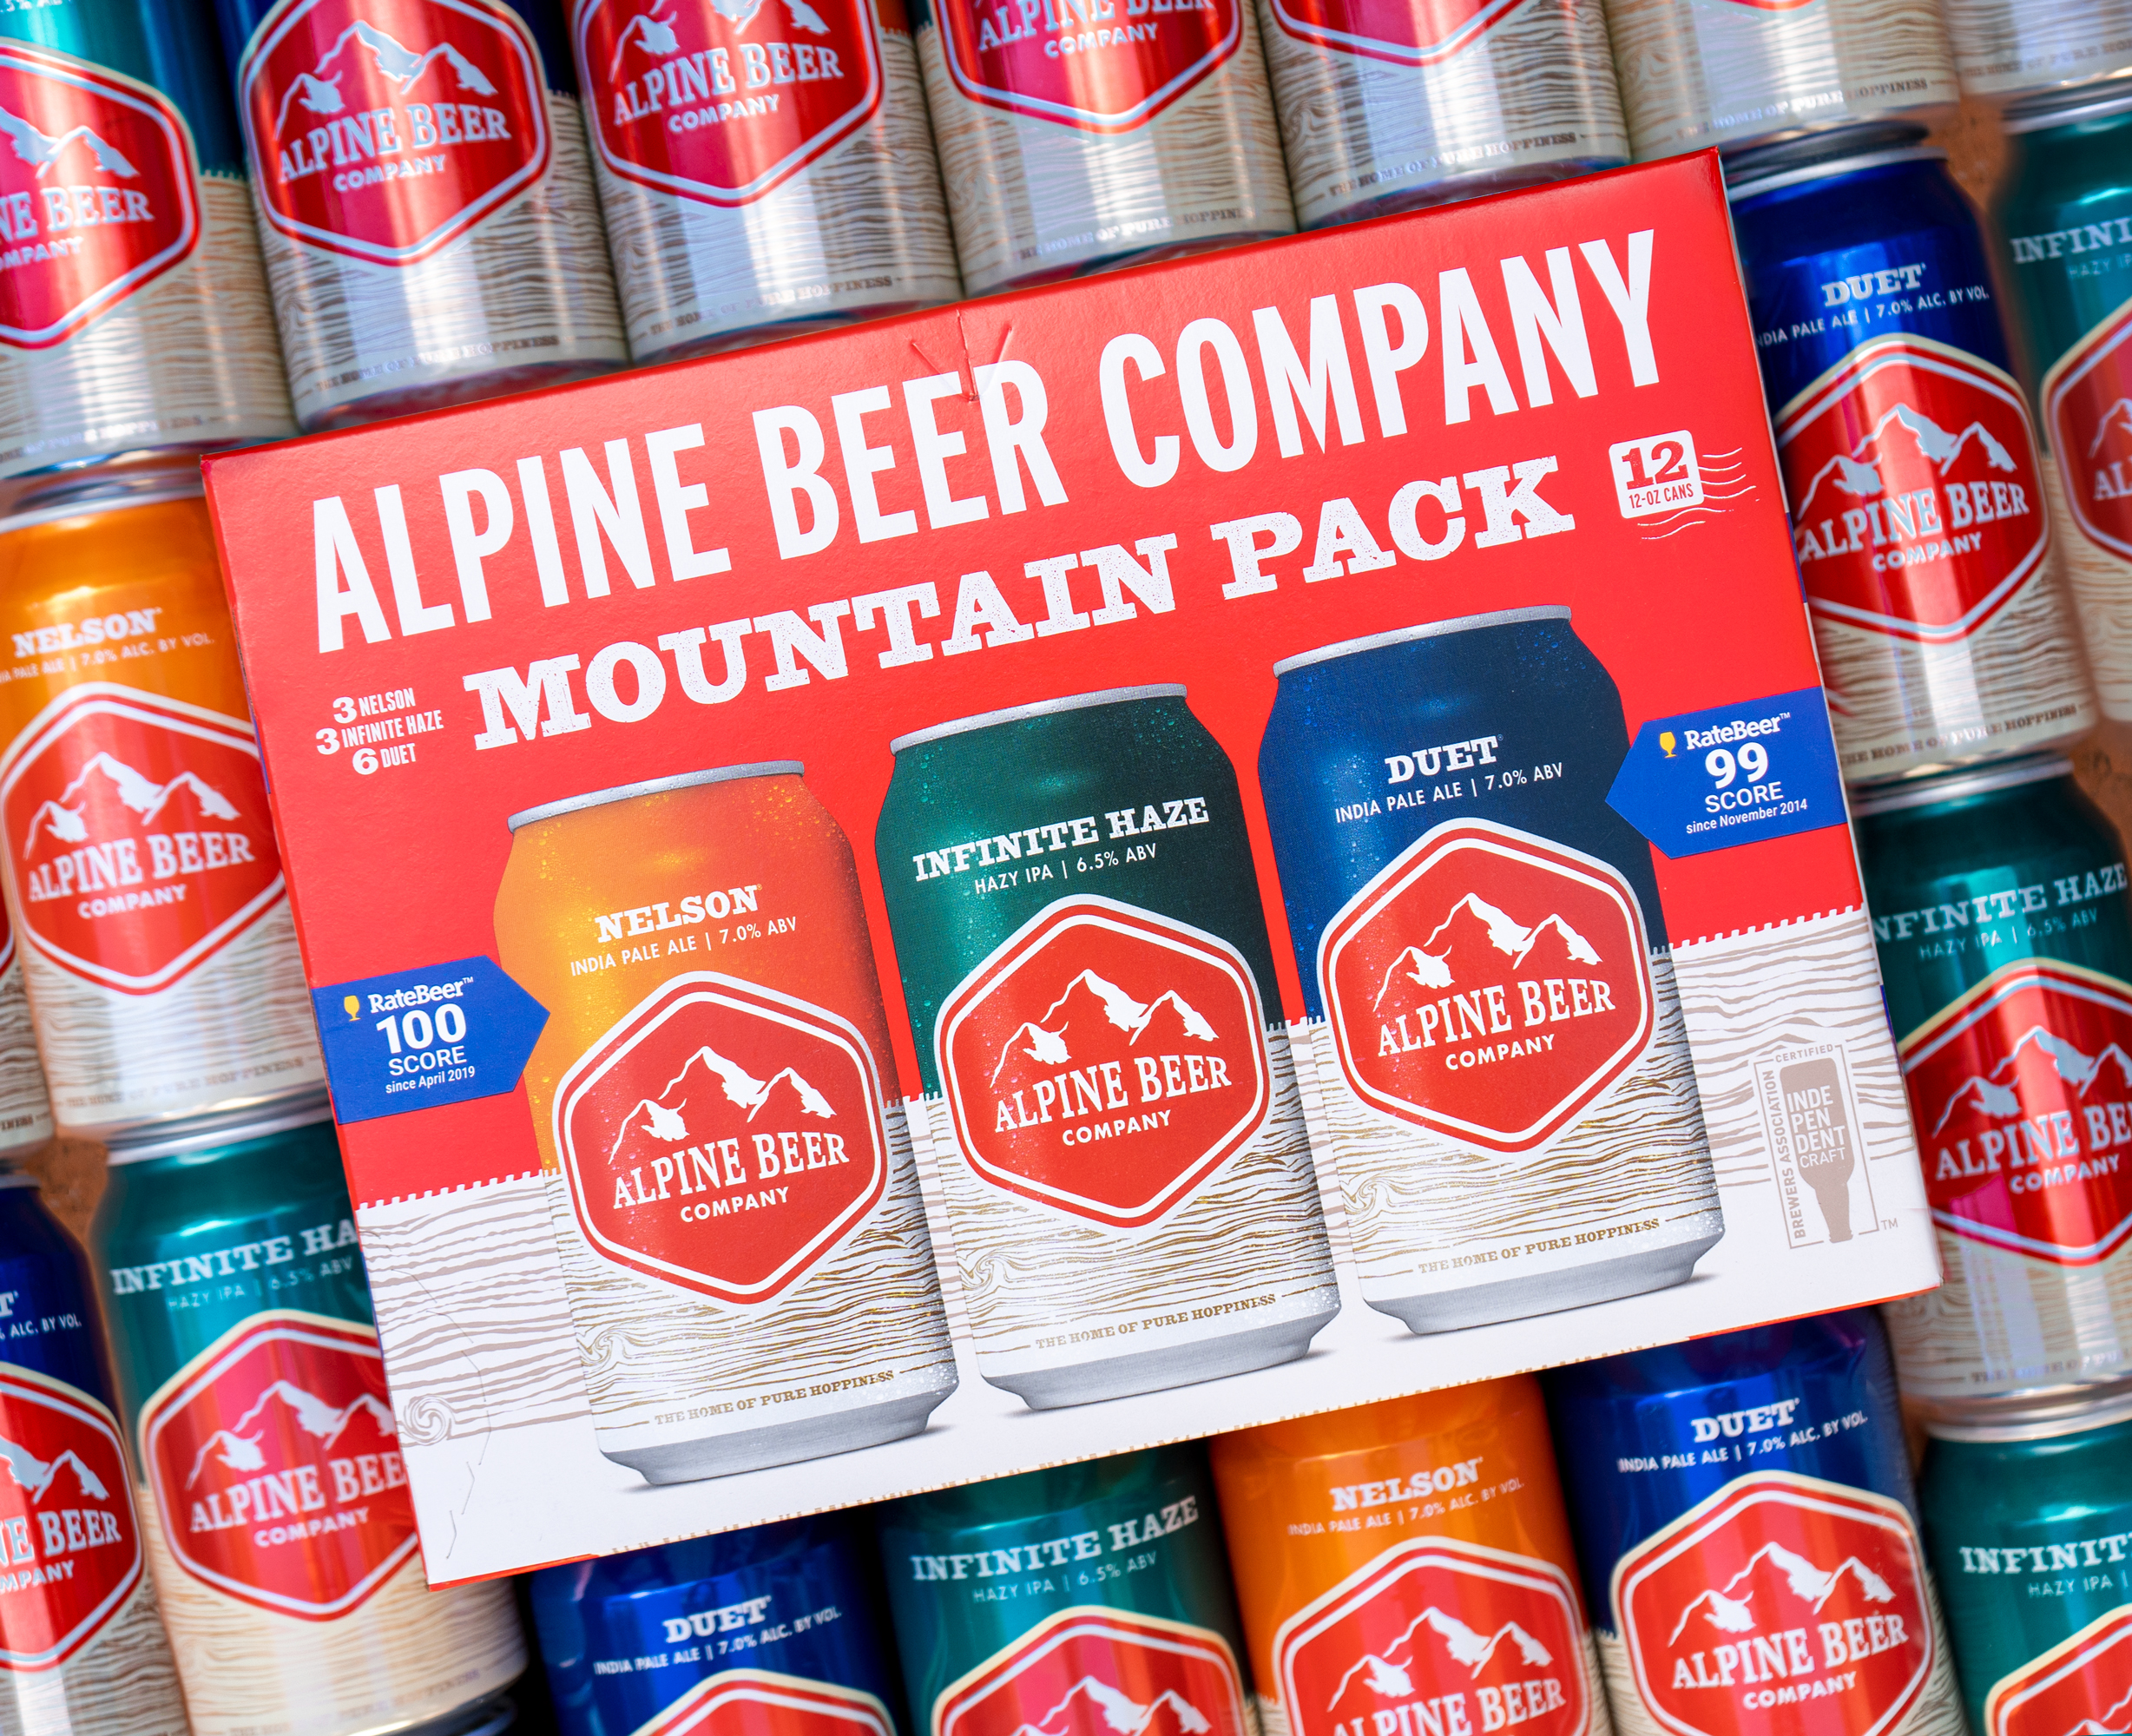 Alpine Beer Company's new 12-can and 24-can Variety Mountain Pack